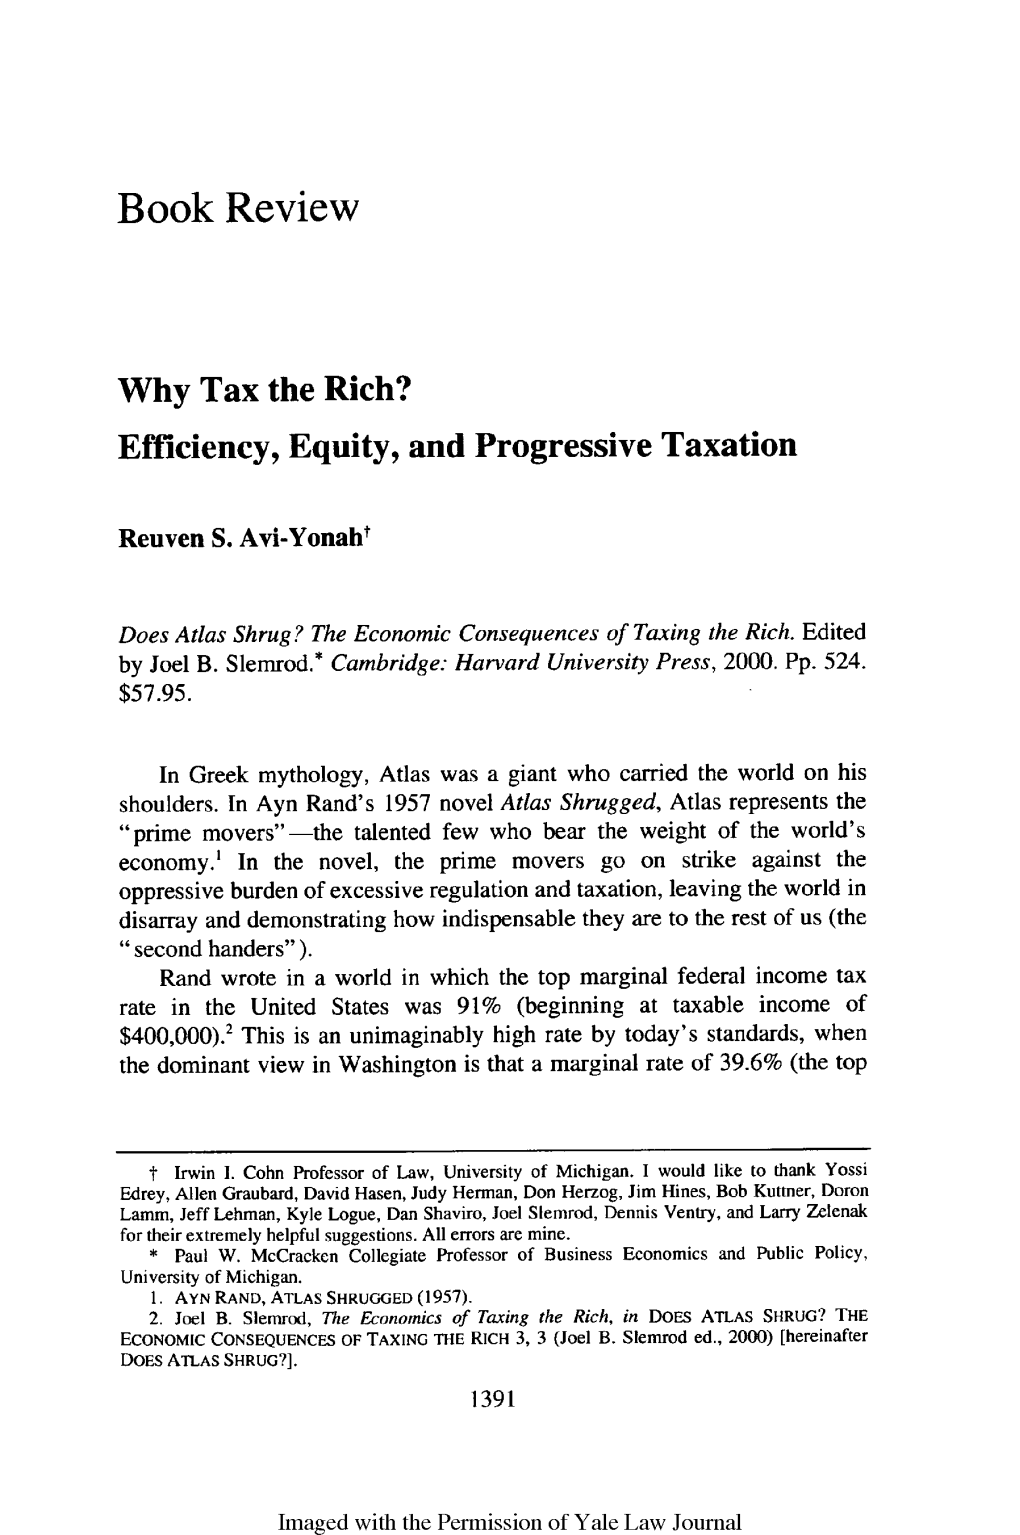 Why Tax the Rich? Efficiency, Equity, and Progressive Taxation